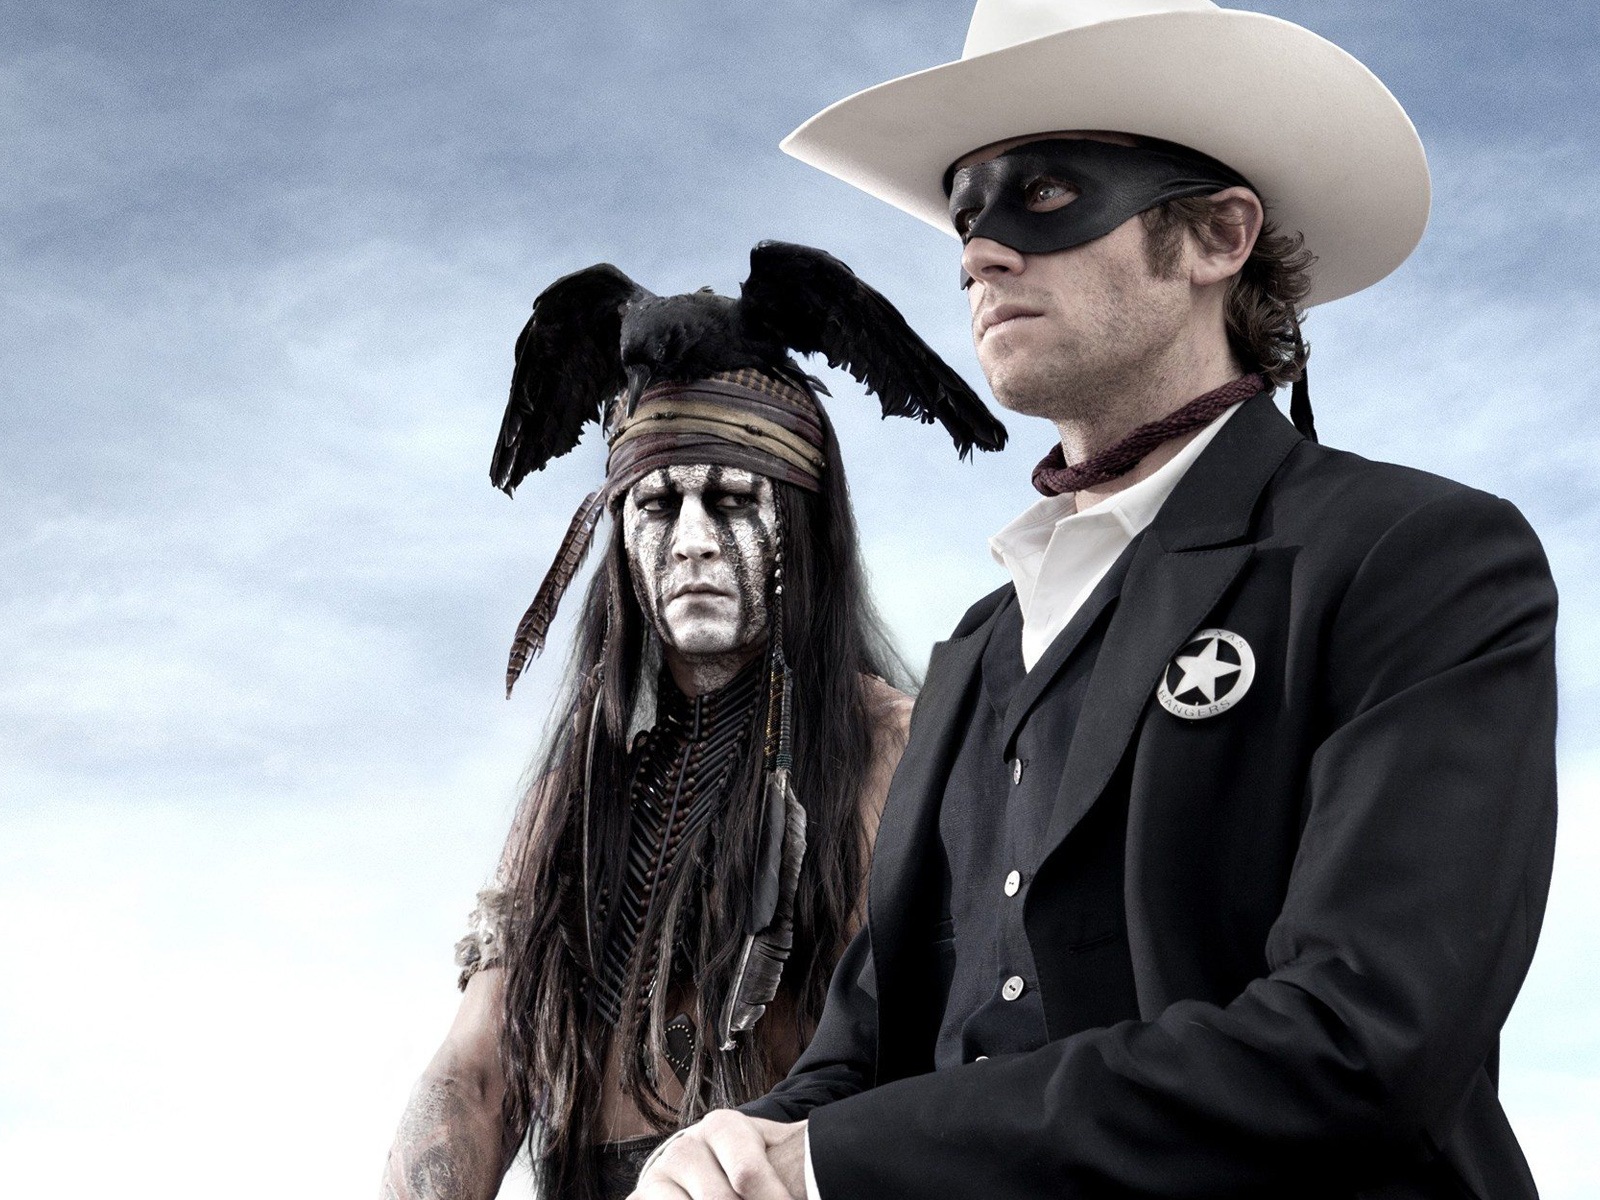 The Lone Ranger HD movie wallpapers #2 - 1600x1200